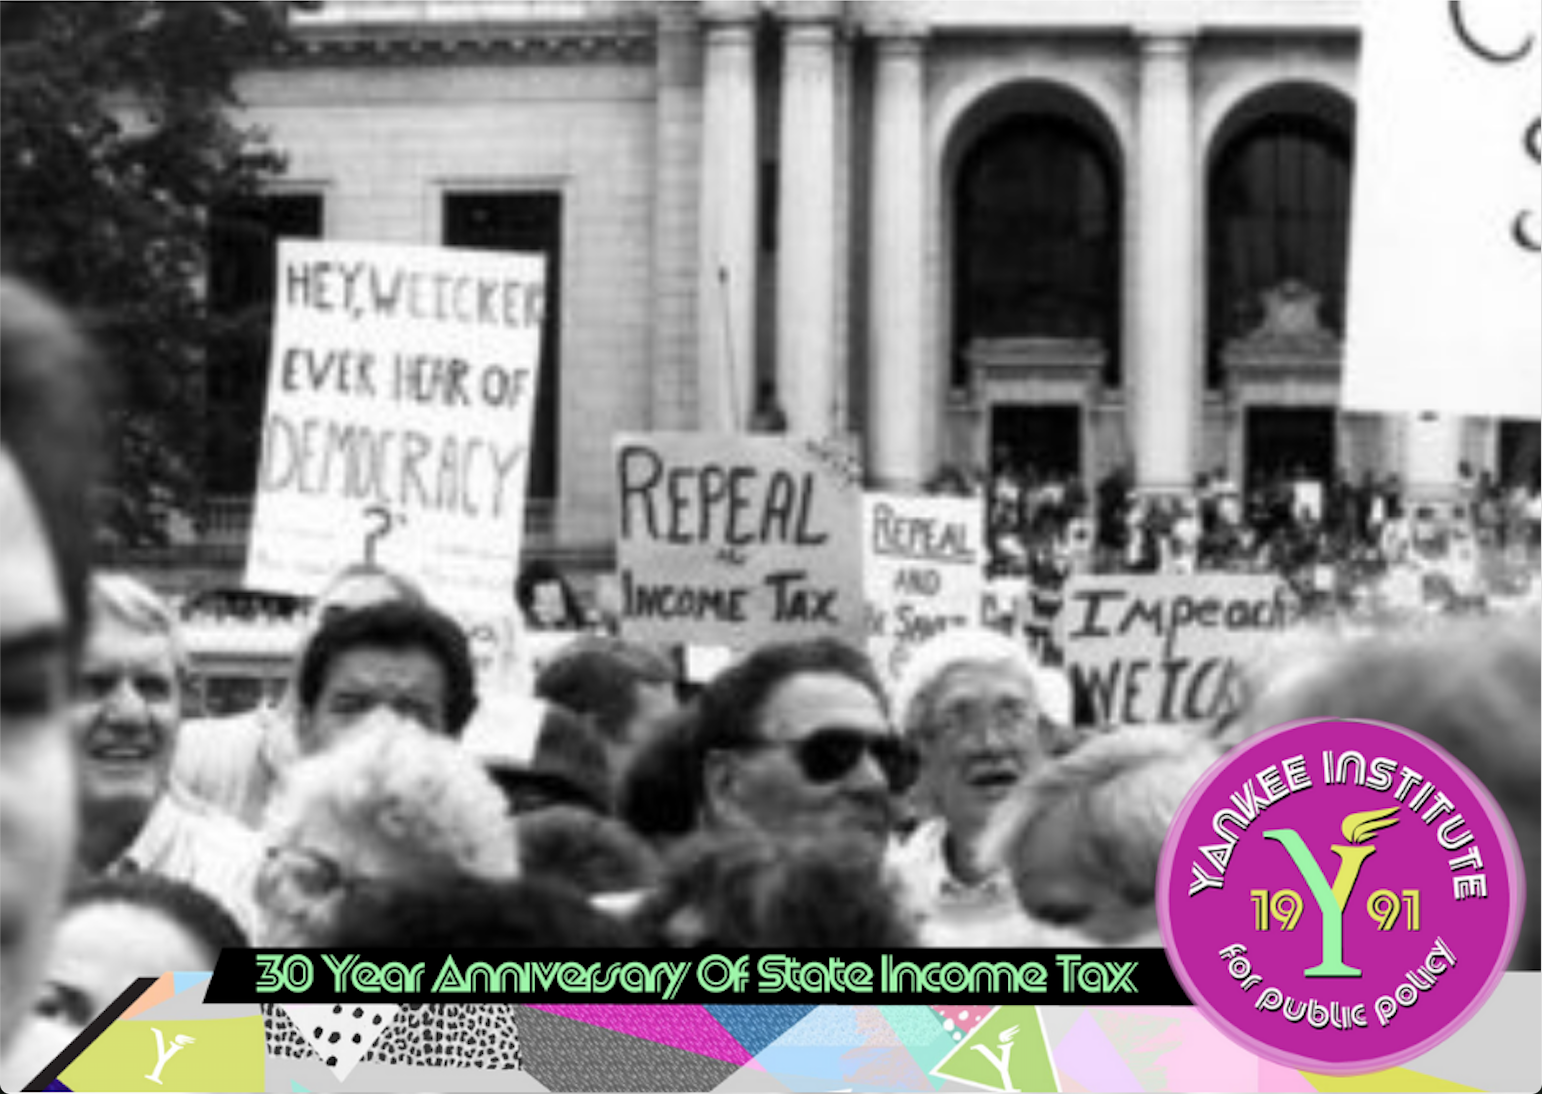 Top 7 things Yankee Institute remembers about 1991: Countdown to the 30-year anniversary of the state income tax